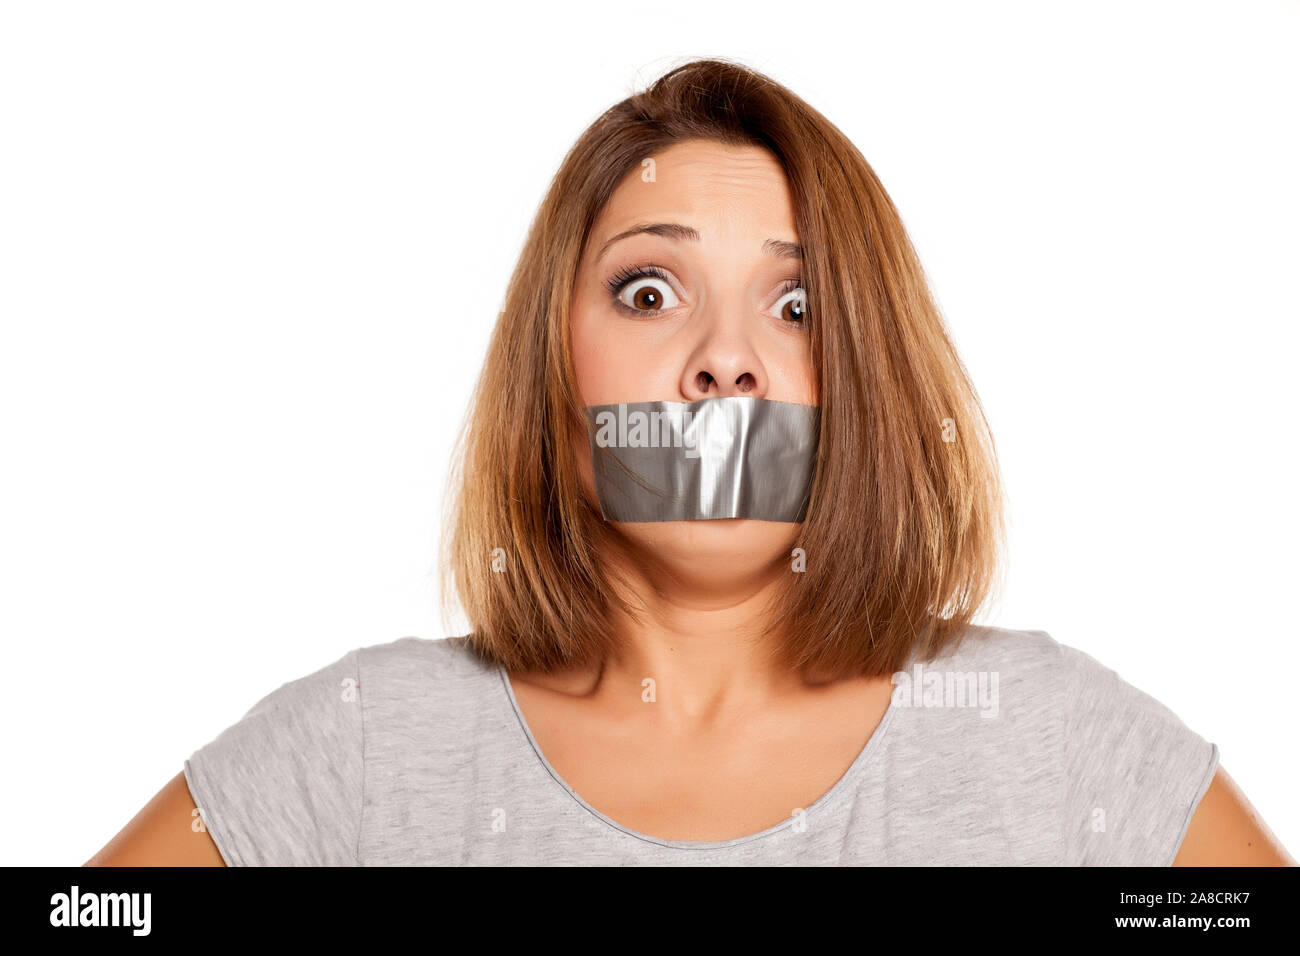 scared young woman with adhesive tape over her mouth Stock Photo